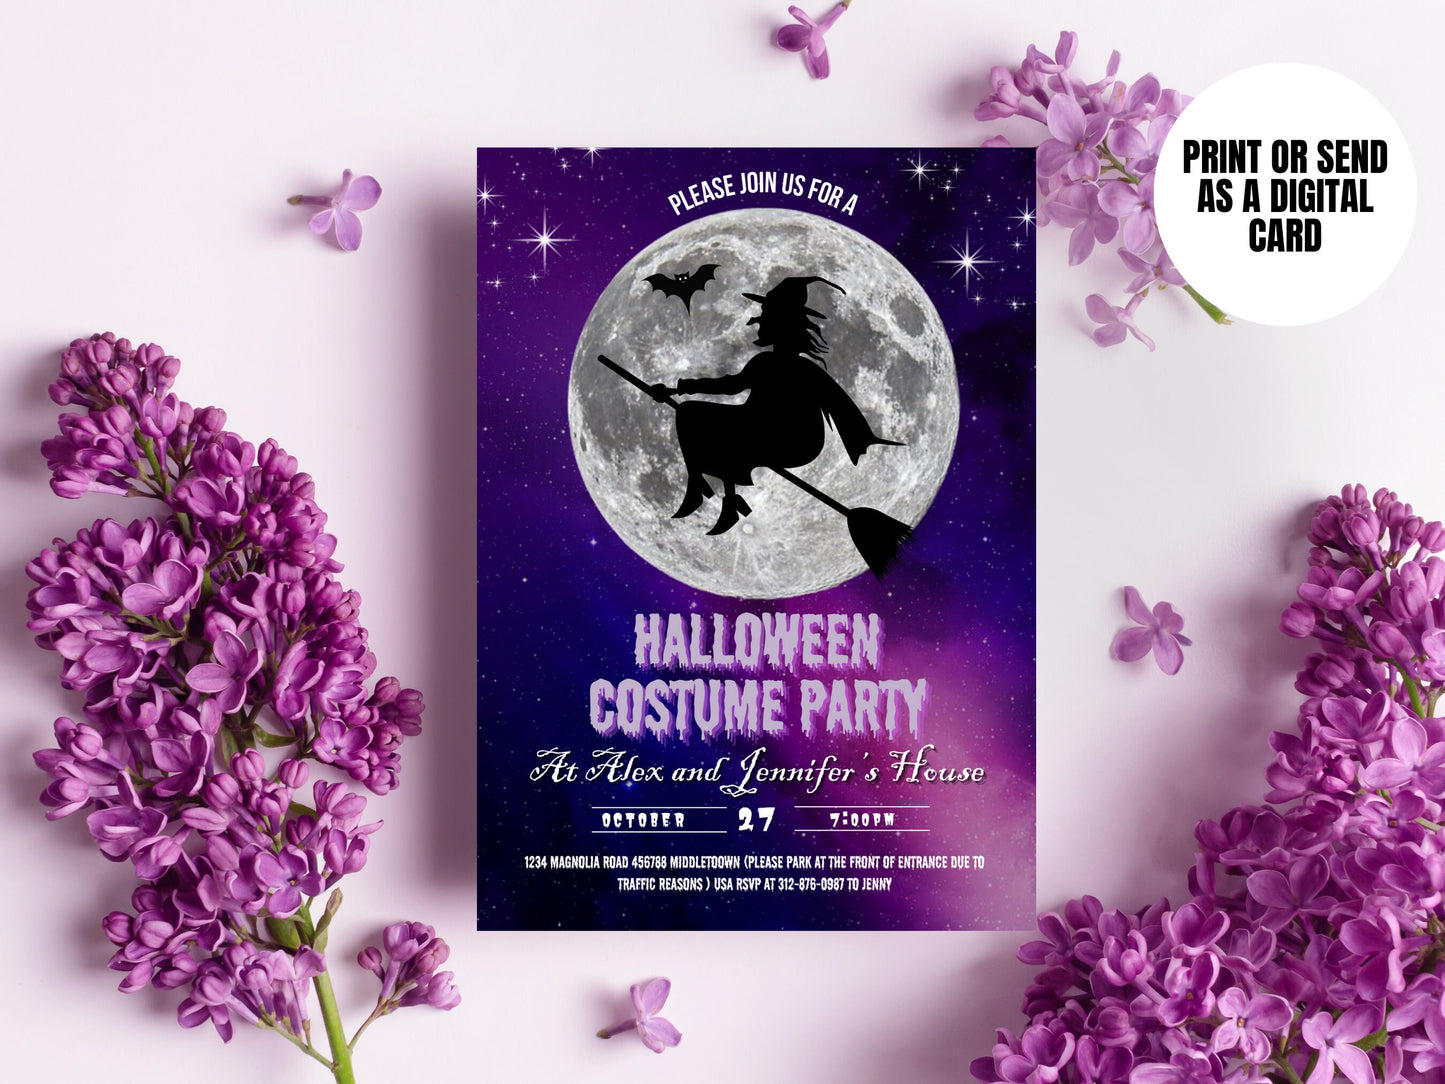 Halloween Invitation - Witch Moon Halloween Costume Party Digital Invite 5x7" & 4x6" Editable Template Instant Download PDF, JPG, or PNG